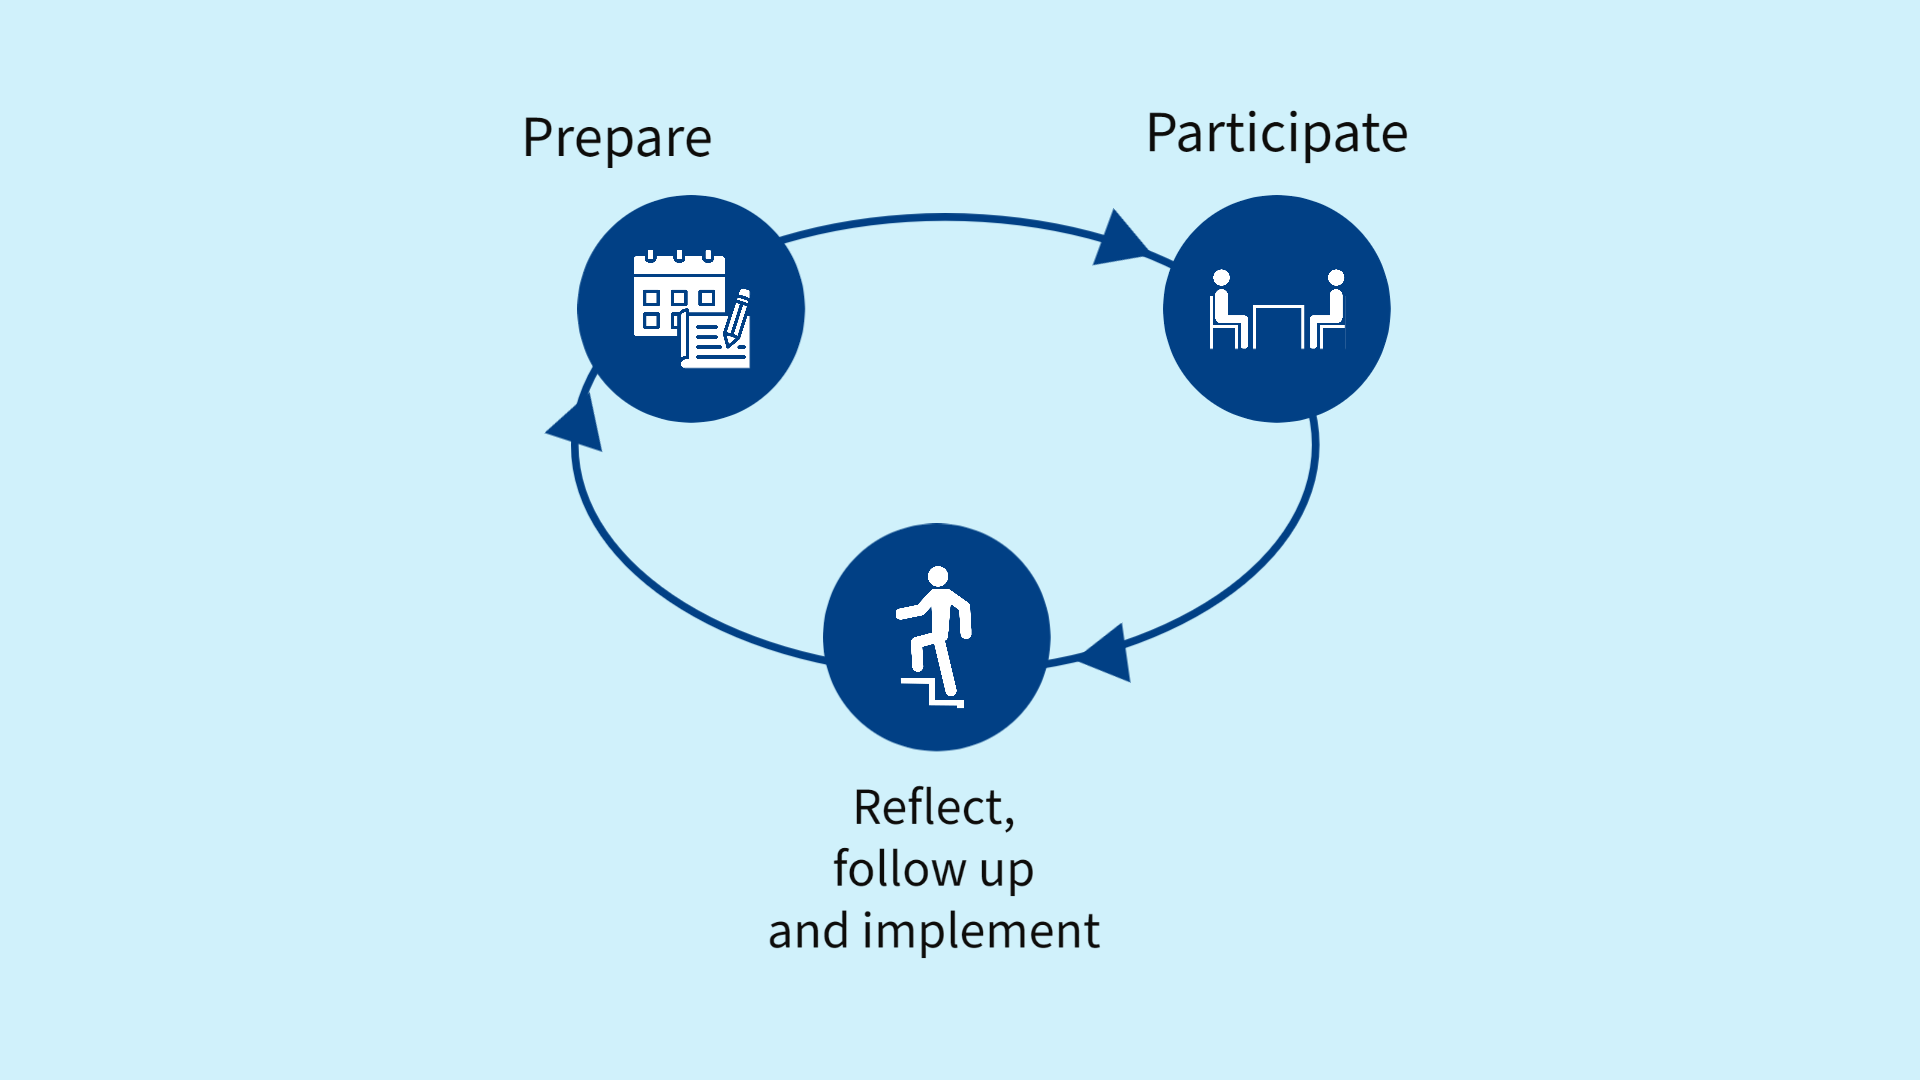 Approach meetings as an iterative cycle. 1) Prepare; 2)Participate, and then: 3) Reflect, follow up and implement. Then the cycle starts again with 'prepare'.